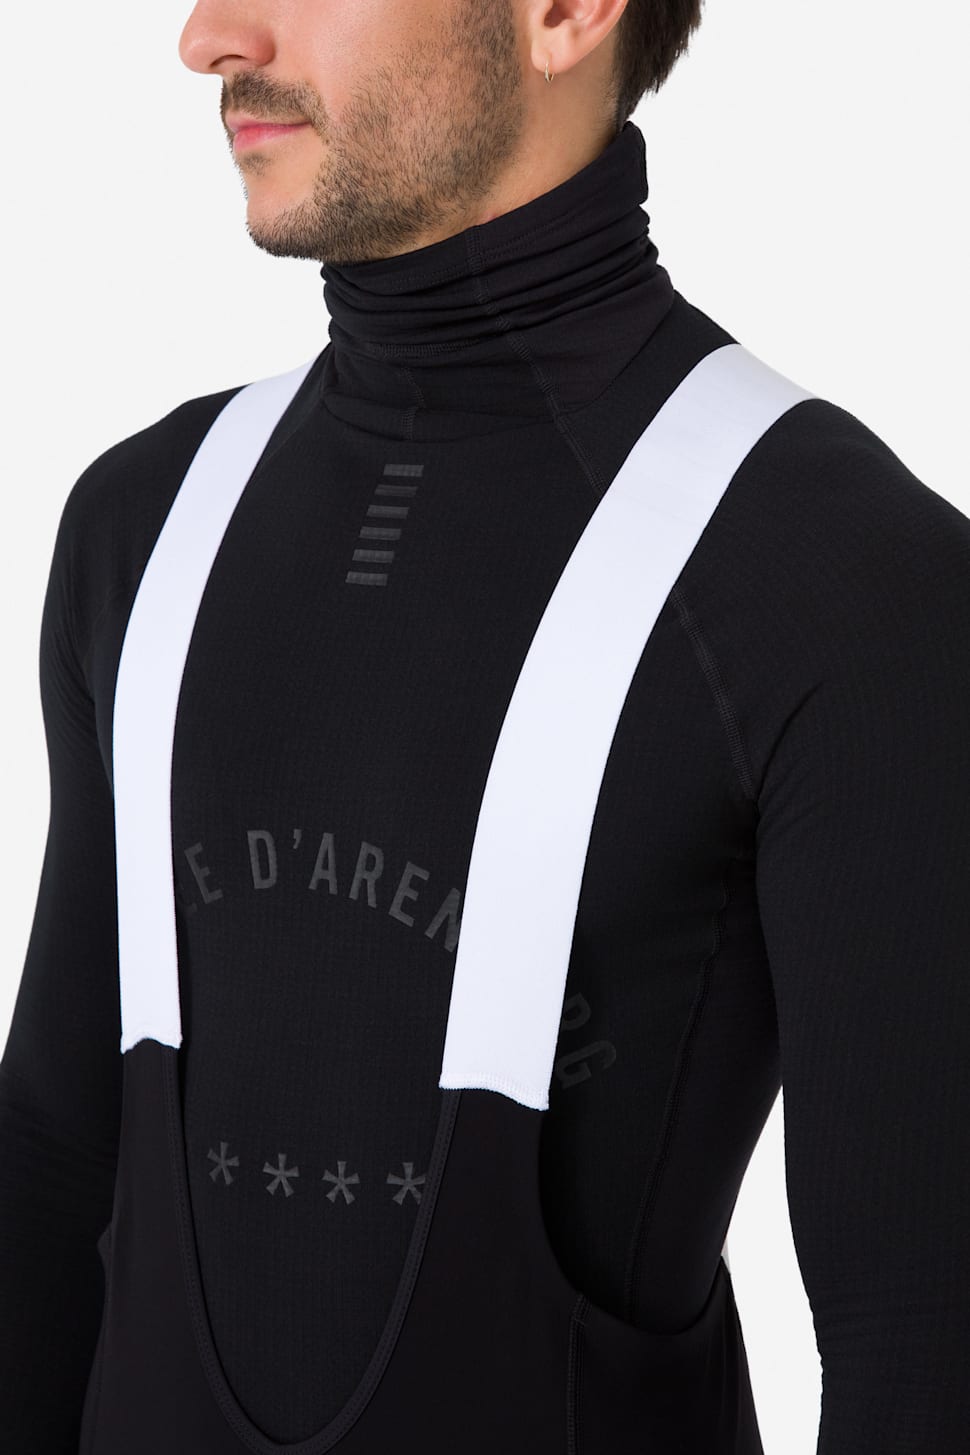 ProAthletica Mens Cycling/Gym Compression/Base Layer Thermal